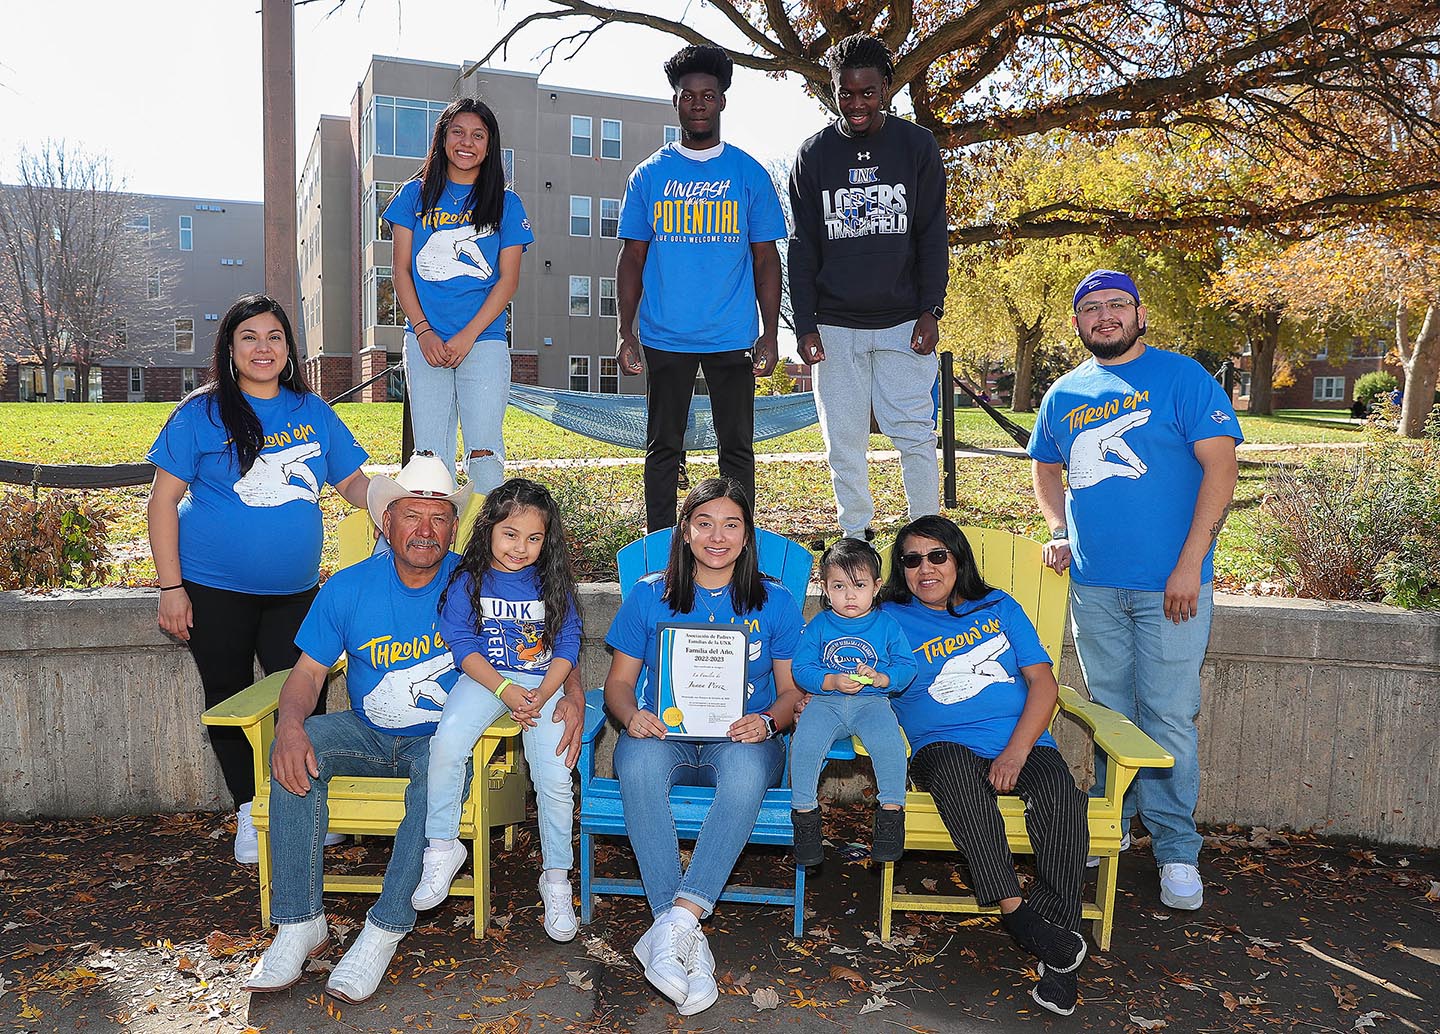 Juana Perez, front center, and her family were recognized Saturday as the Family of the Year by the UNK Parent and Family Association and Office of Student and Family Transitions. (Photo by Erika Pritchard, UNK Communications)